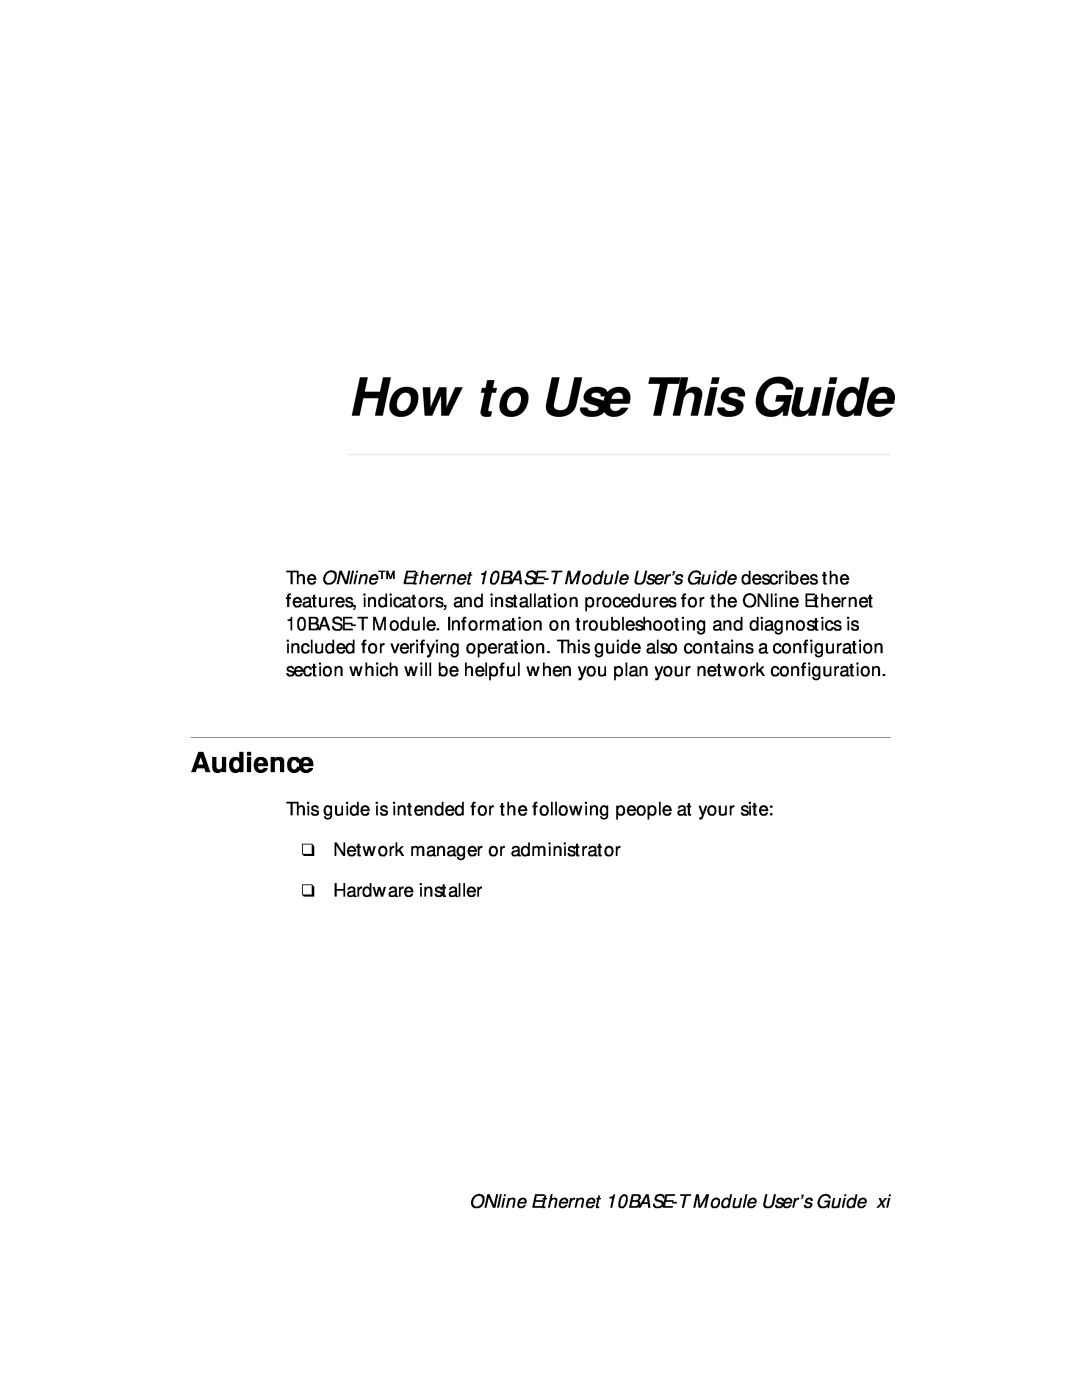 3Com 5108M-TP manual How to Use This Guide, Audience 